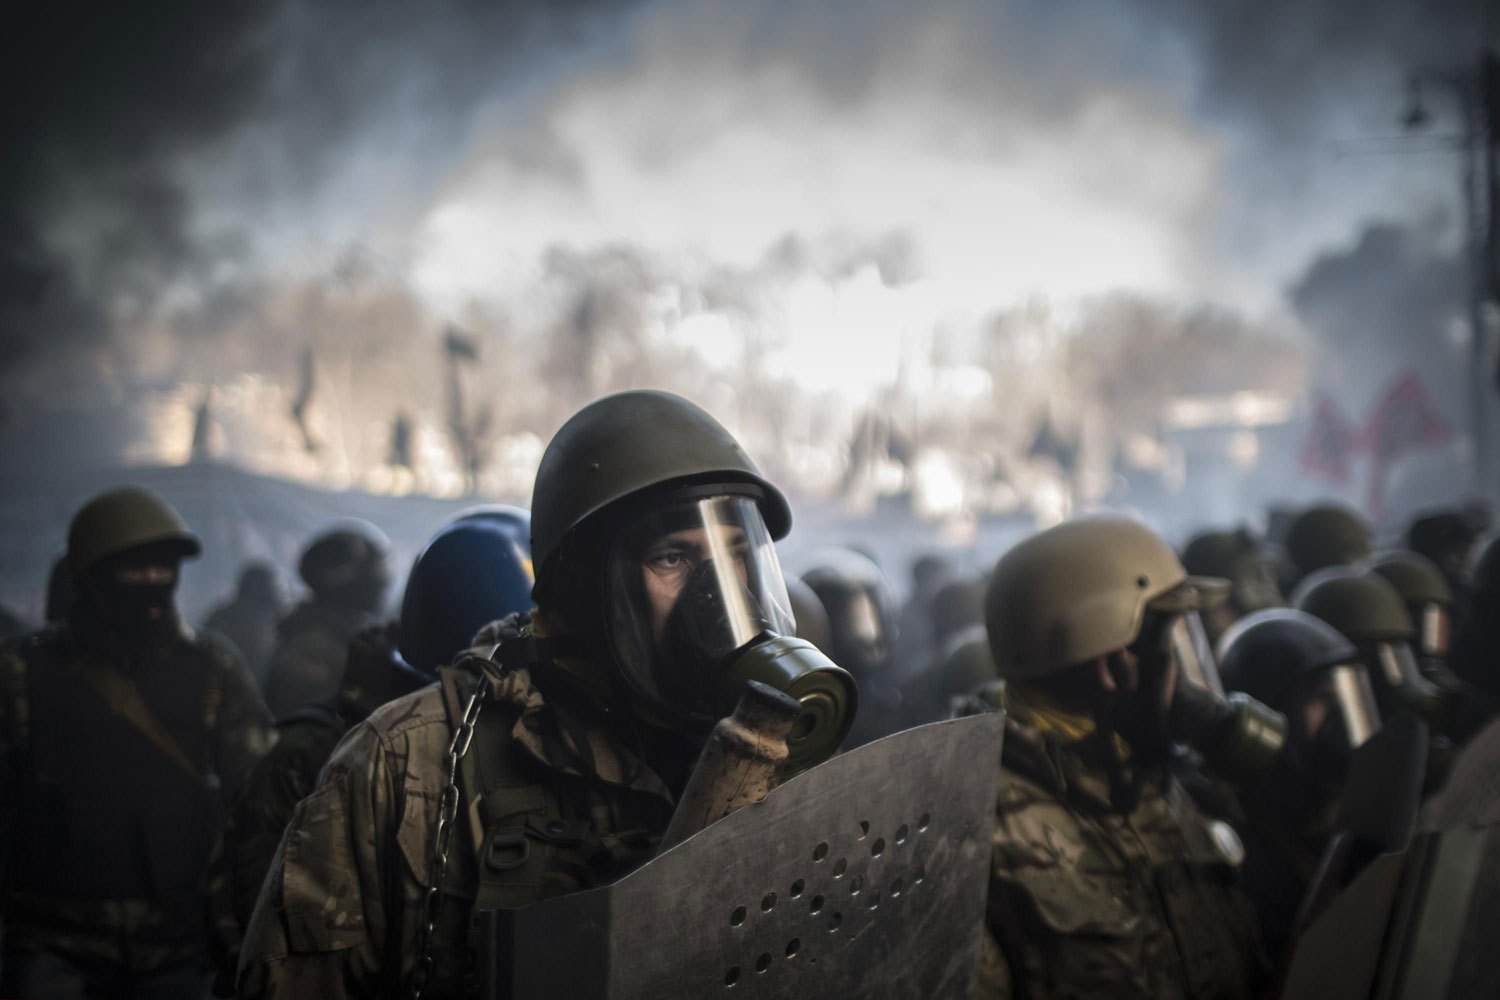 Protesters are ready to storm Kiev city hall as Maidan self-defence activists guard the building to prevent it during their confrontation in Kiev, on Feb. 18, 2014.